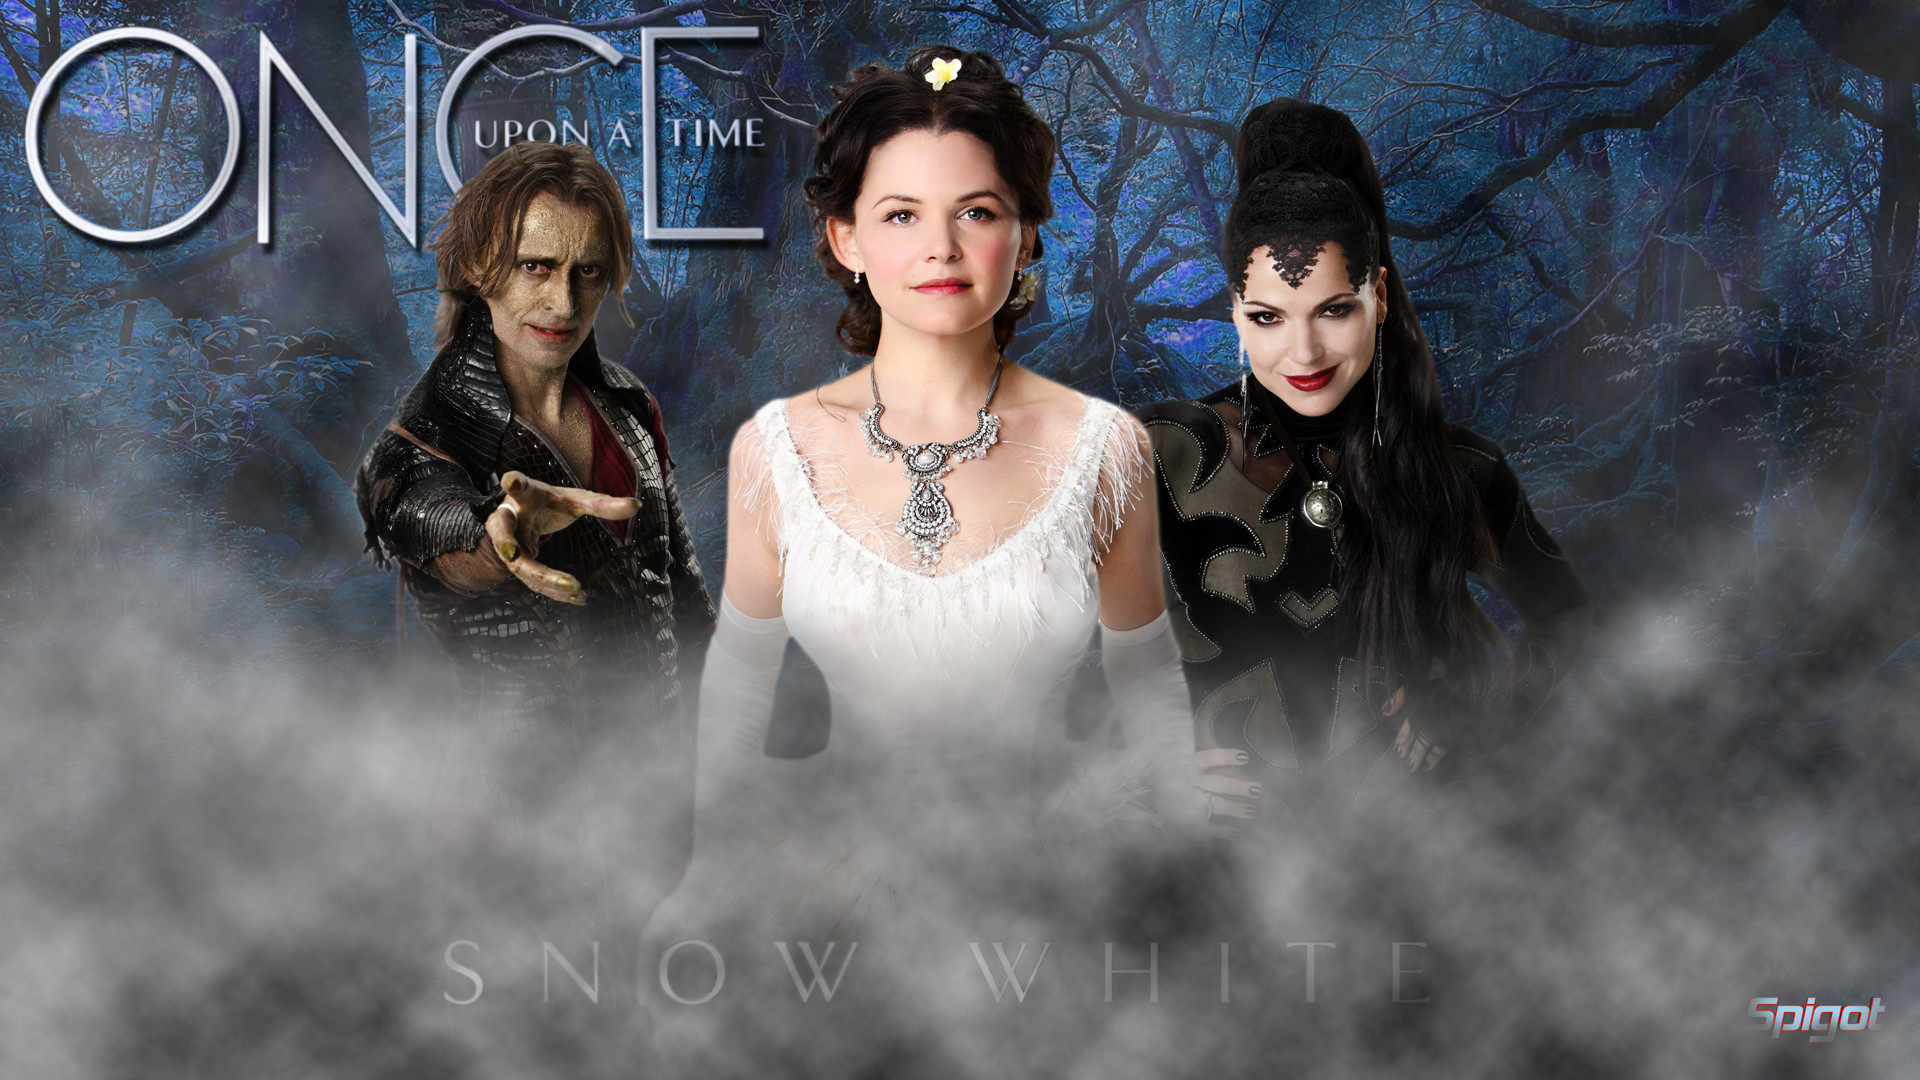 More Once Upon A Time Wallpapers